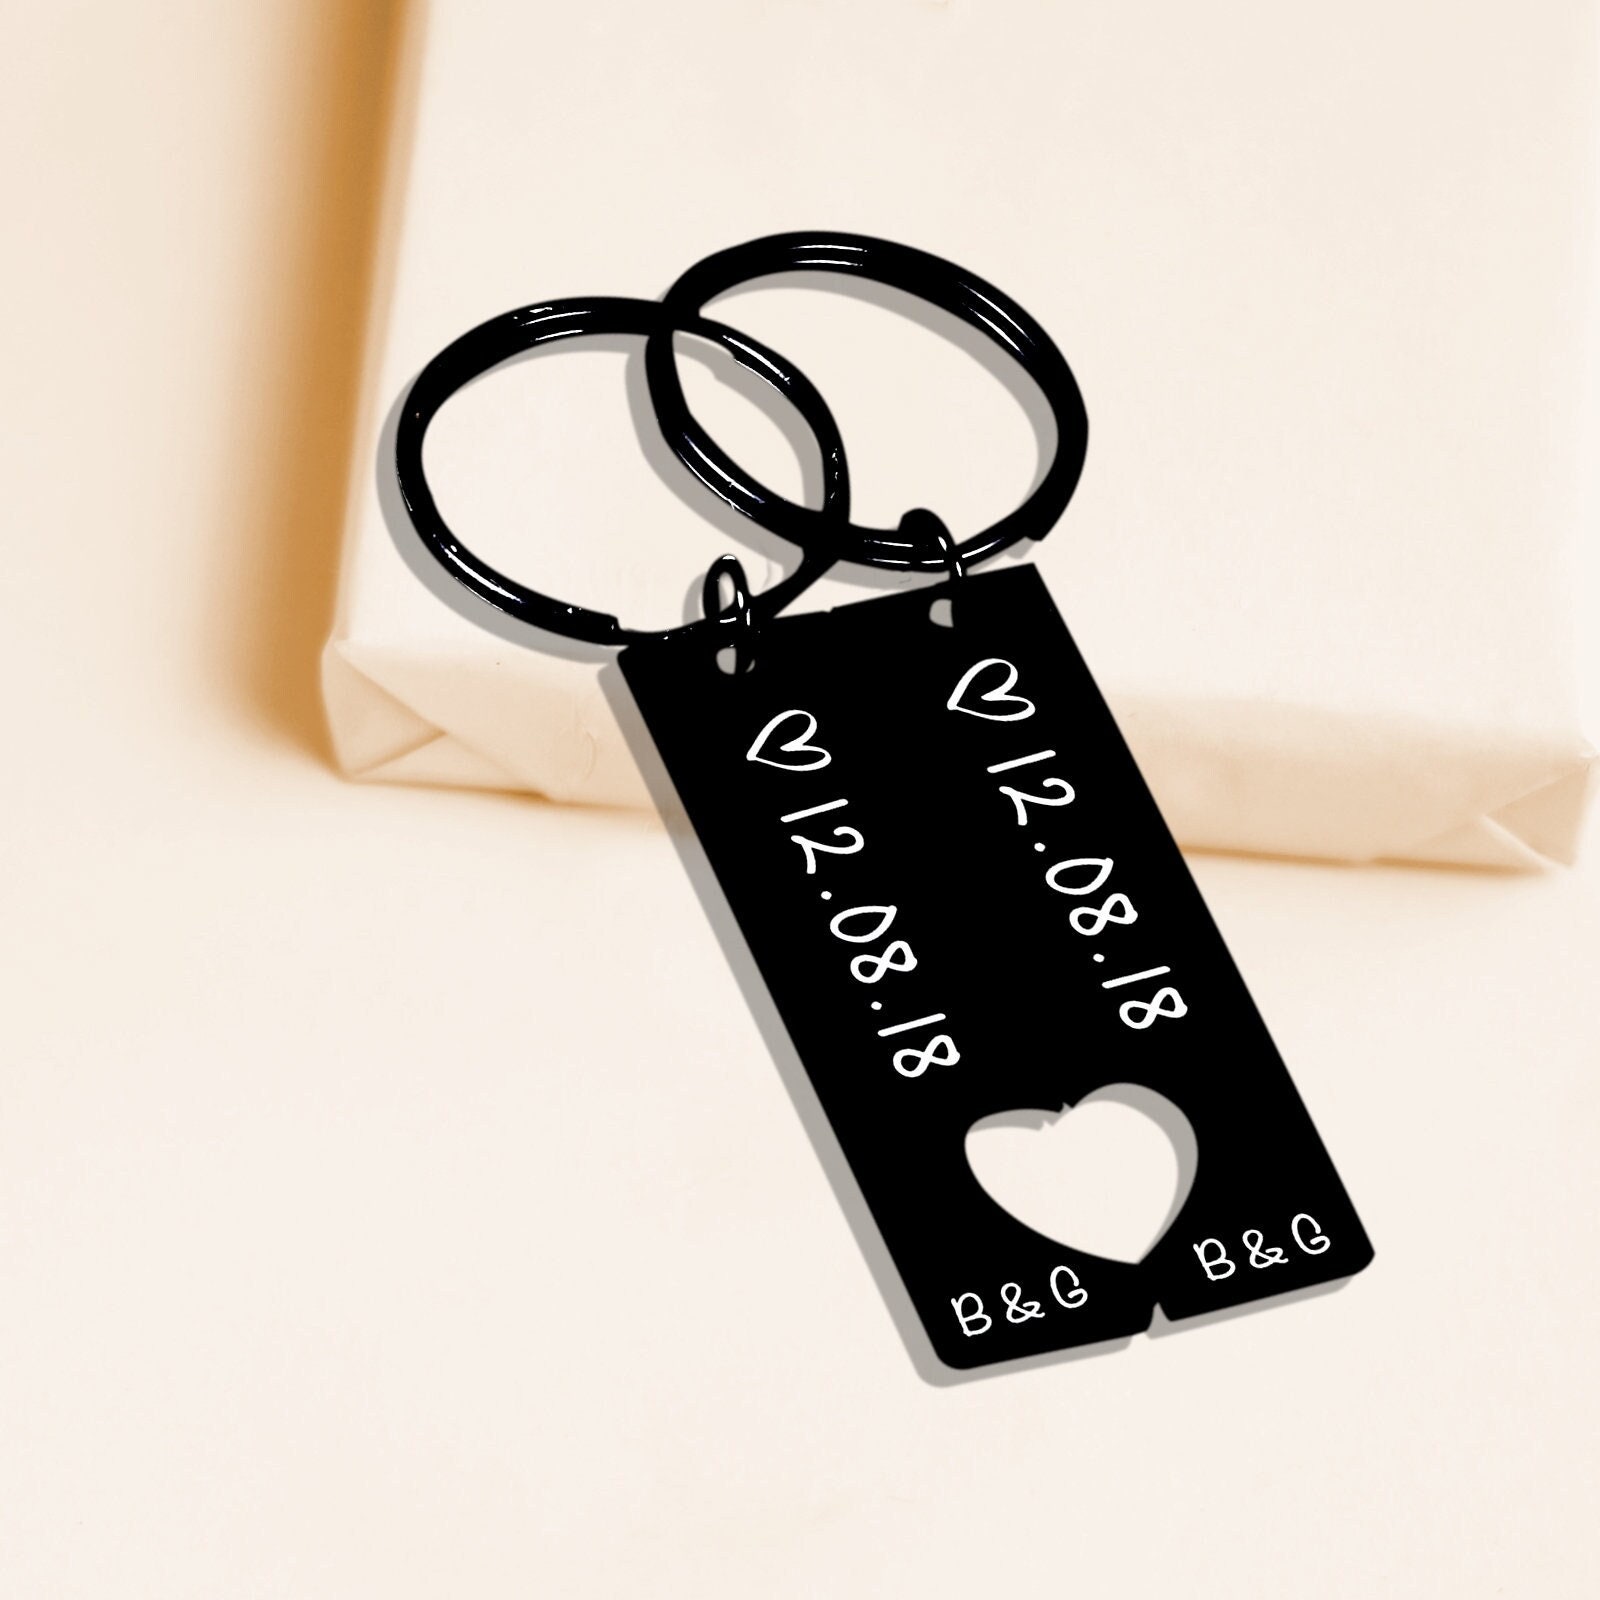 His and Her Keychain Set 2Pcs Couple Gifts for Boyfriend and Girlfriend A  Piece of Him and Her Keychain Set Couple Jewelry Anniversary Valentine's  Day Gift for Boyfriend Girlfriend Husband Wife at